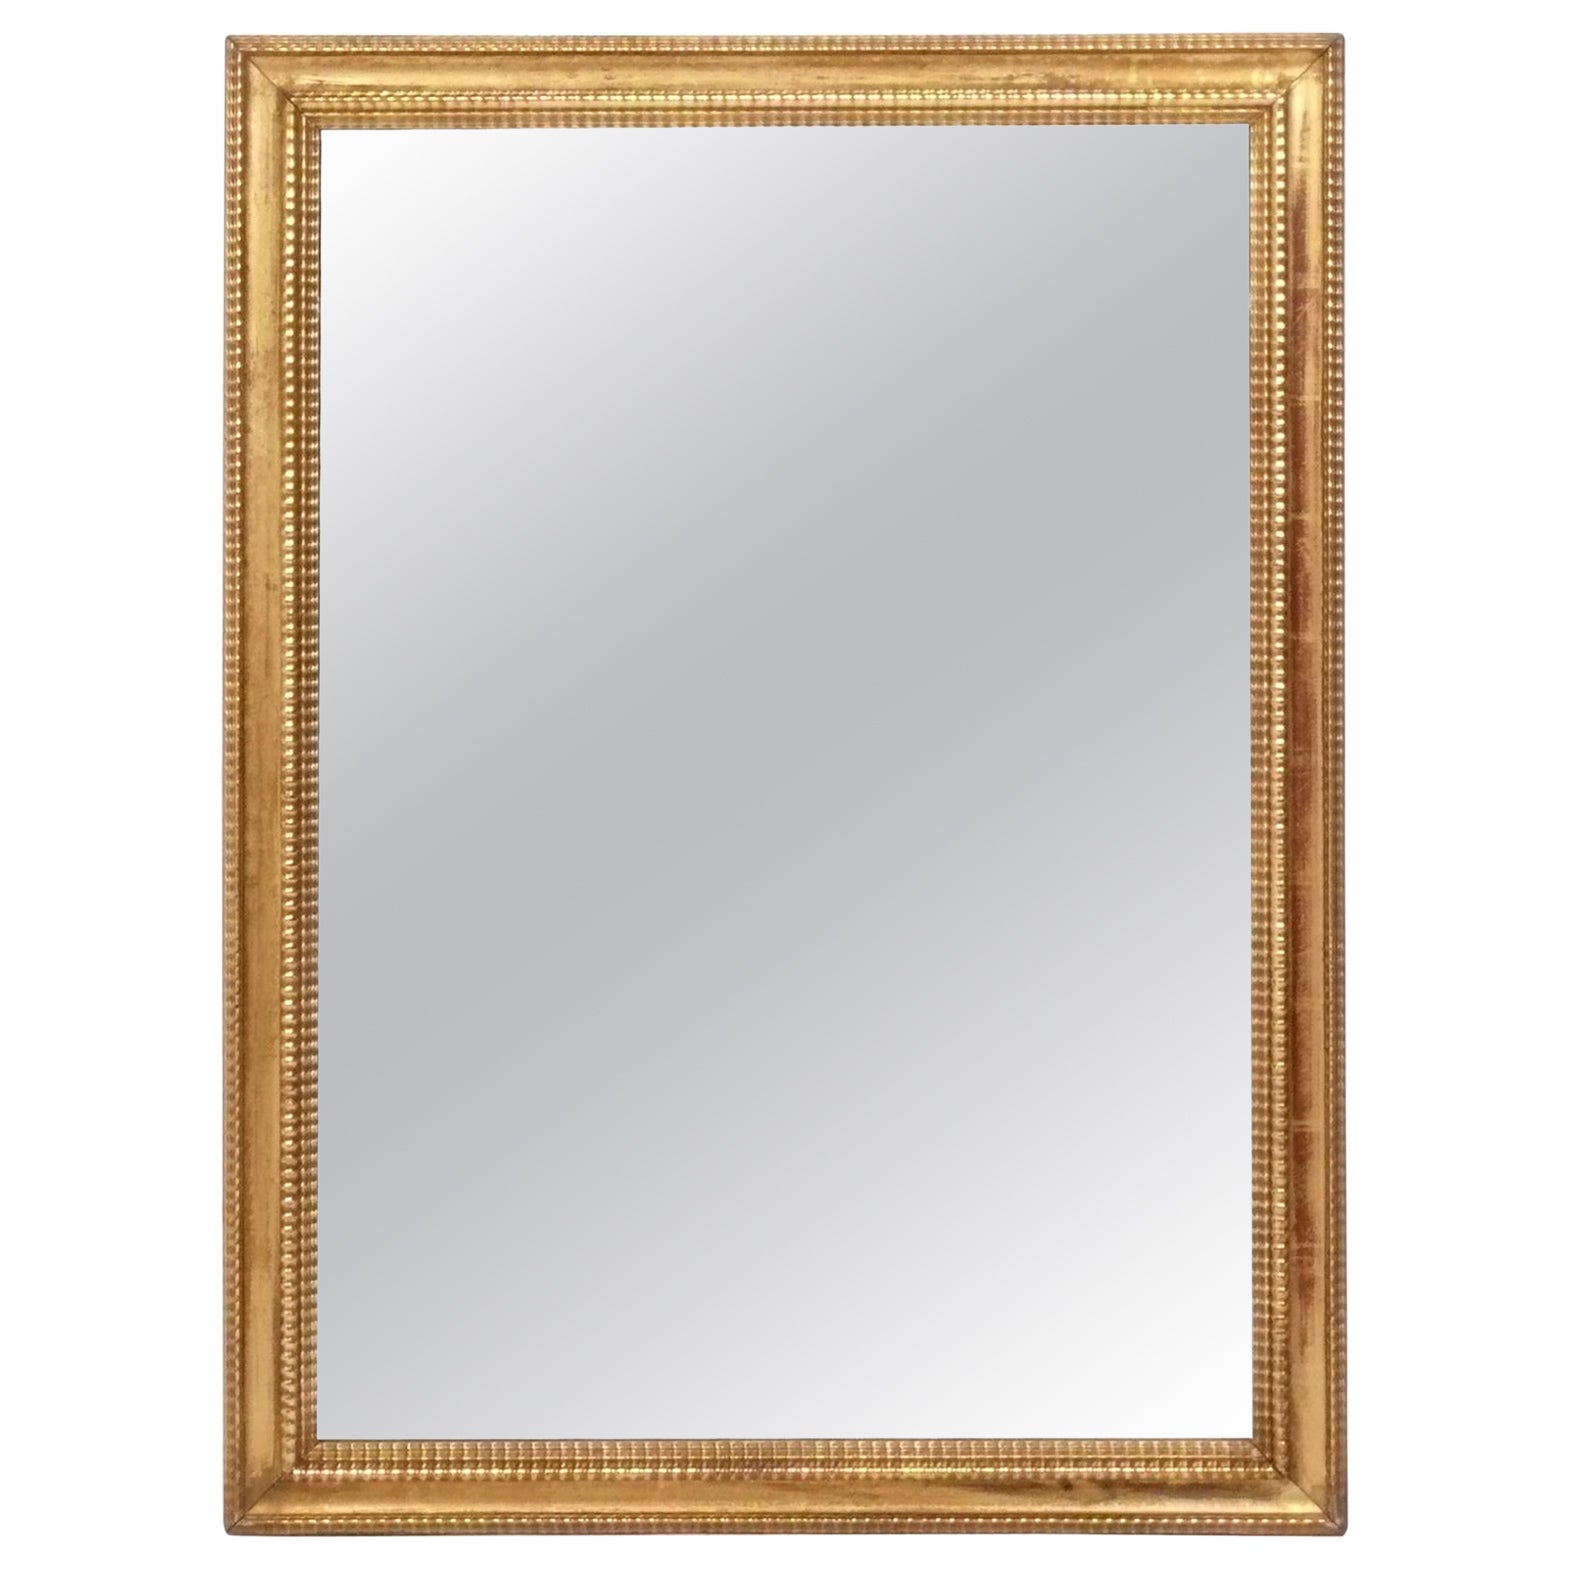 Gilt Italian Mirror from the Carlyle Hotel